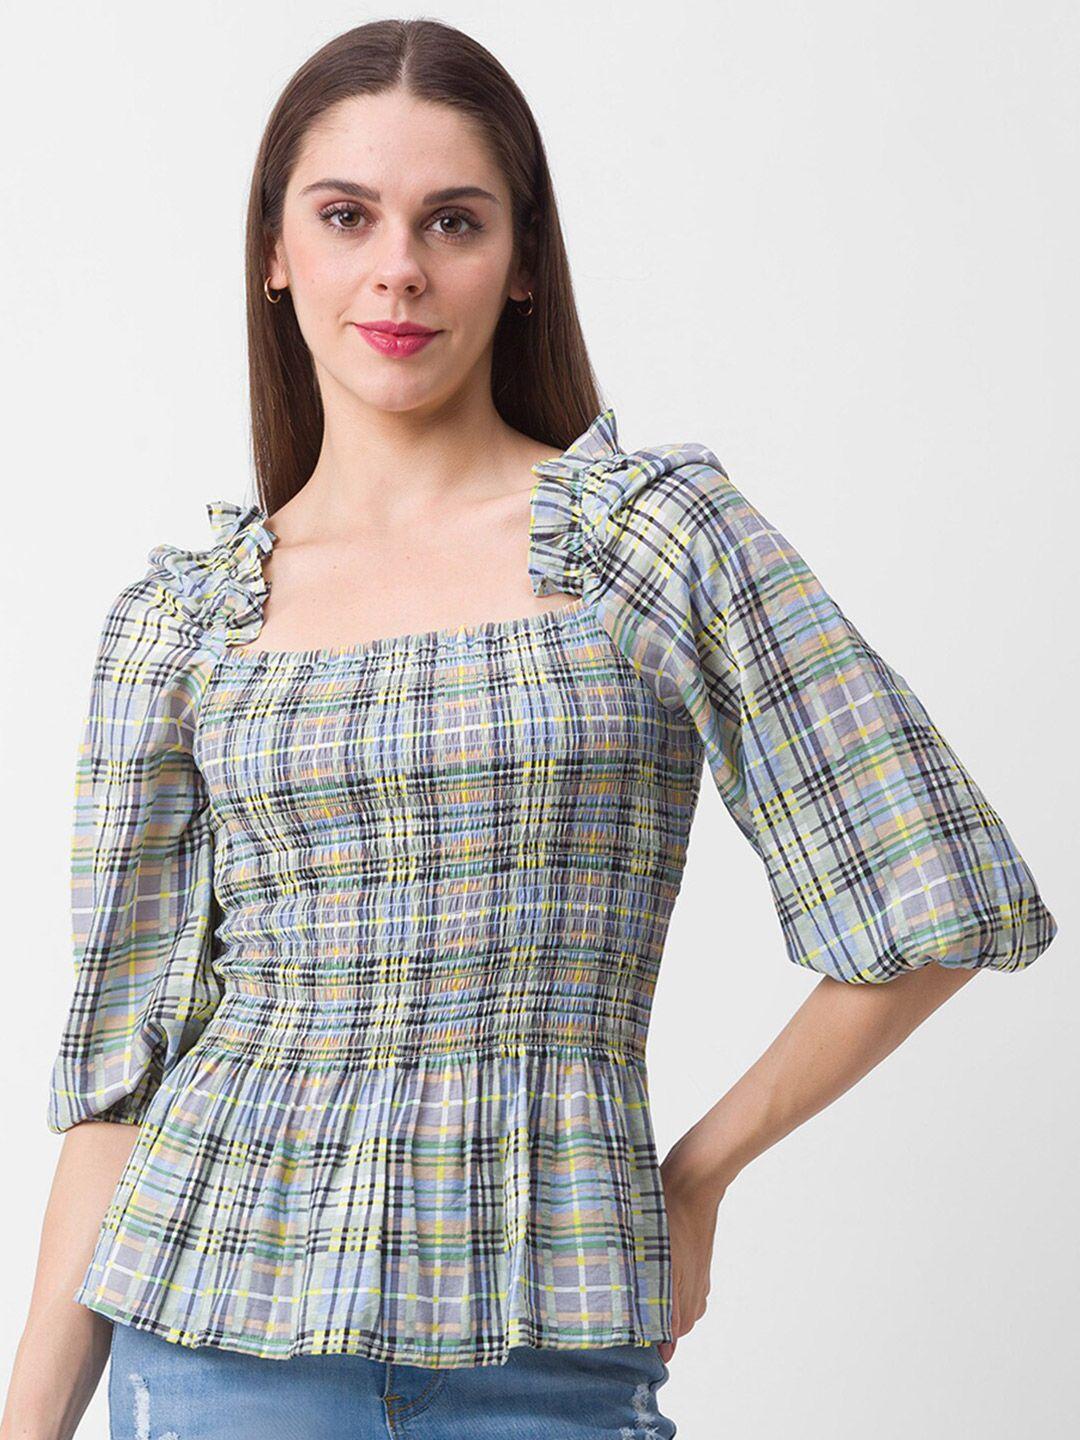 globus grey & blue checked cinched waist top